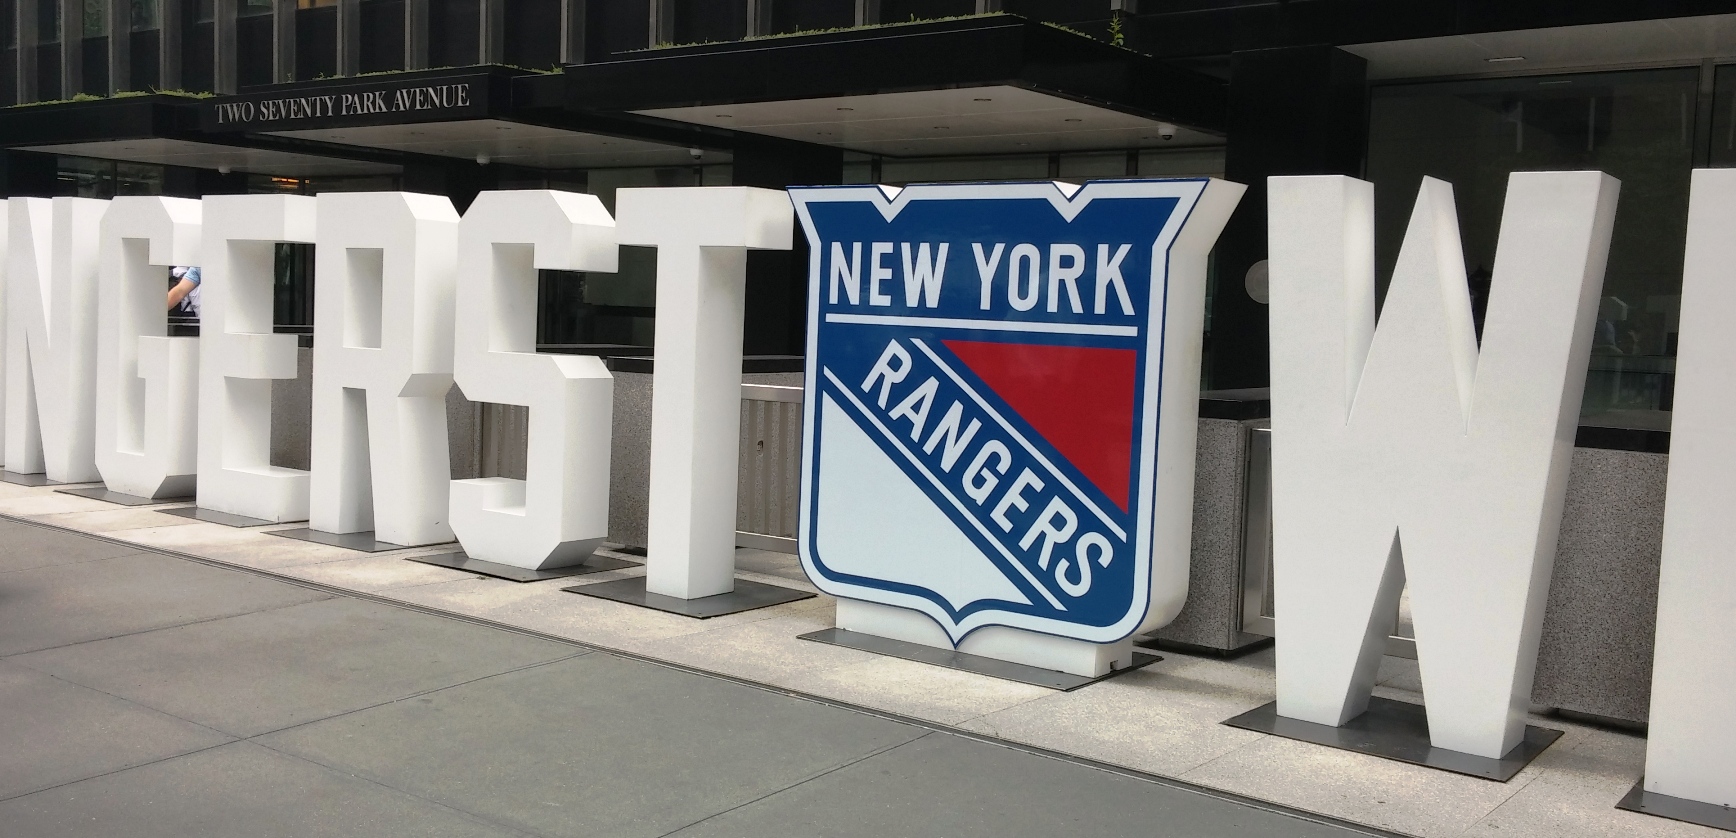 3 New York Rangers Expected to Make the 2014 U.S. Olympic Hockey Team for Sochi